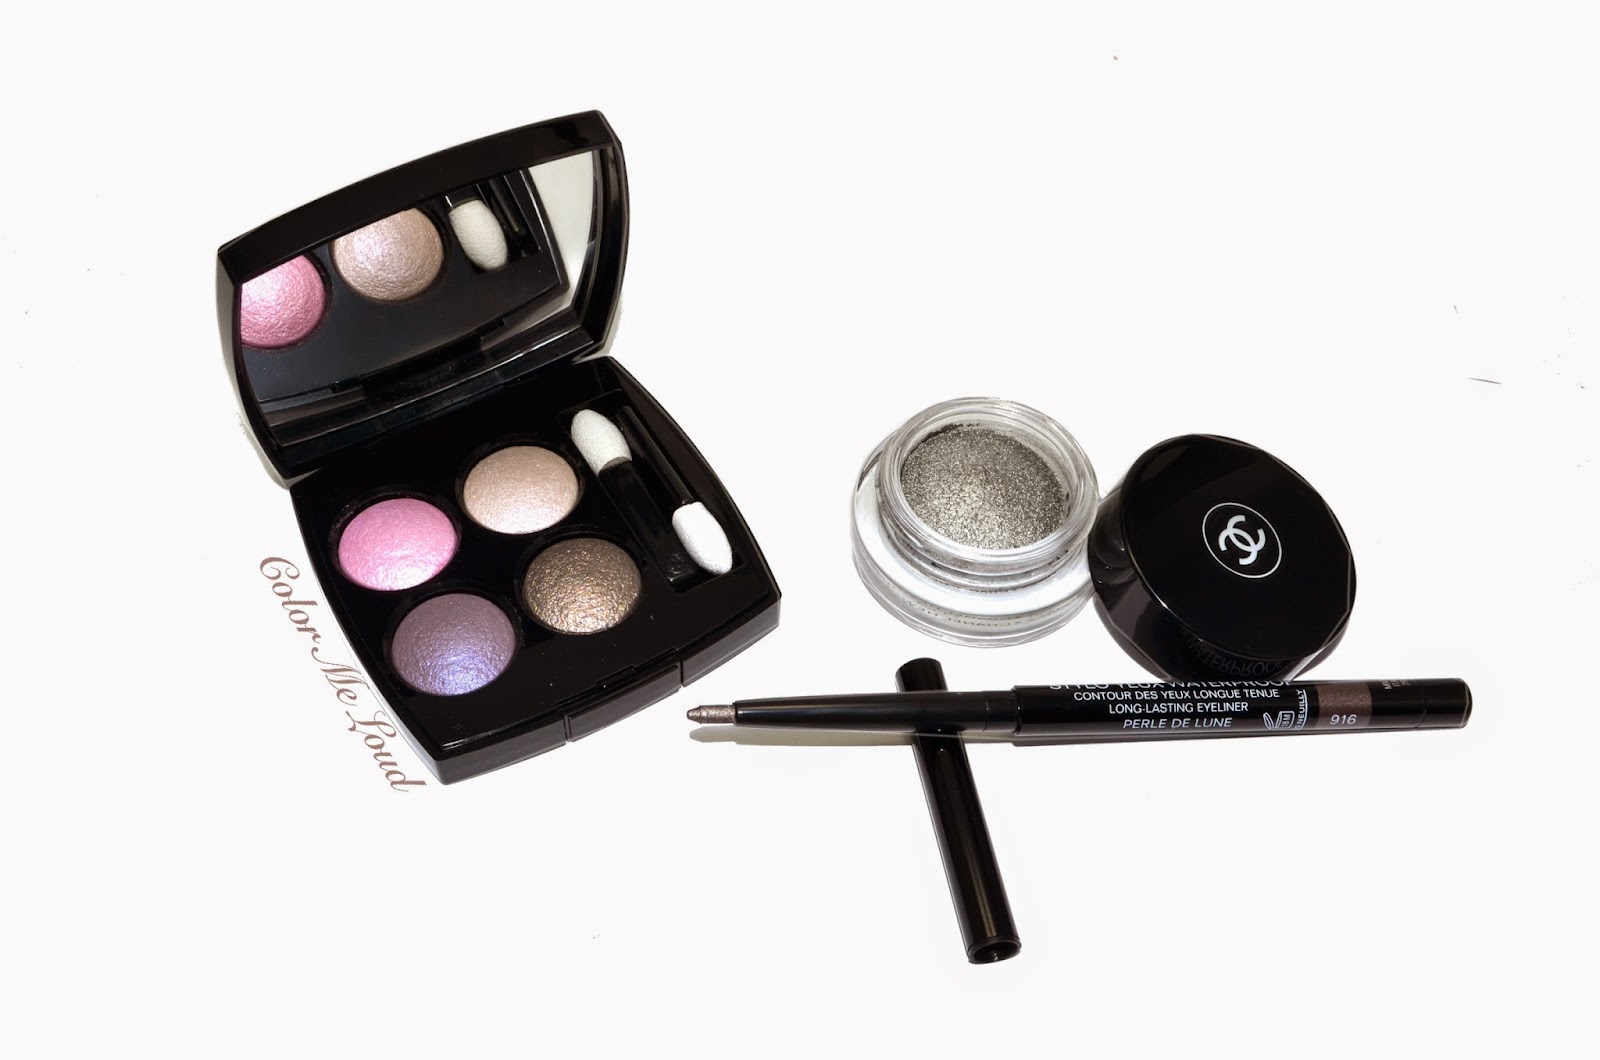 Jayded Dreaming Beauty Blog : 204 TISSE VENDOME CHANEL LES 4 OMBRES MULTI-EFFECT  QUADRA EYESHADOW - SWATCHES AND REVIEW